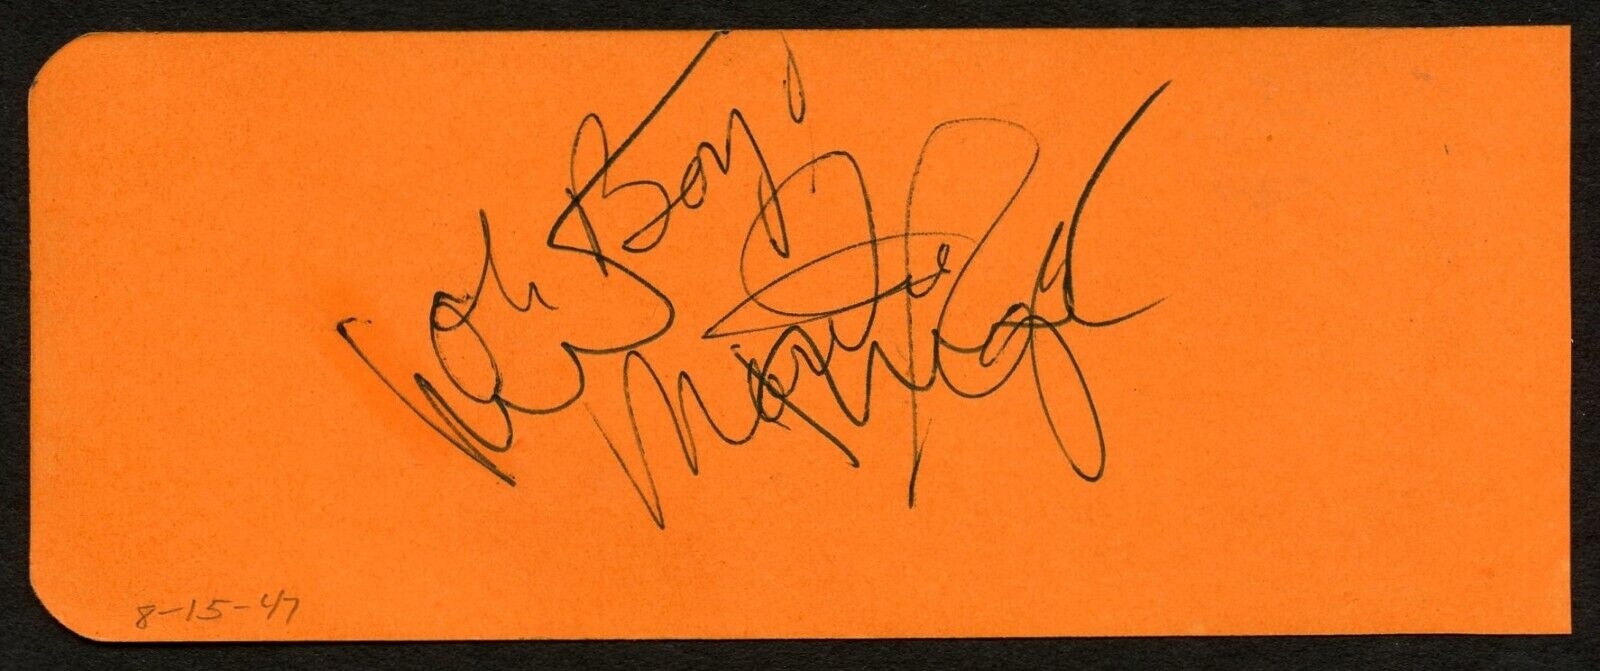 Martha Raye d1994 & Ted Donaldson d2023 signed 2x5 cut autograph in 1947